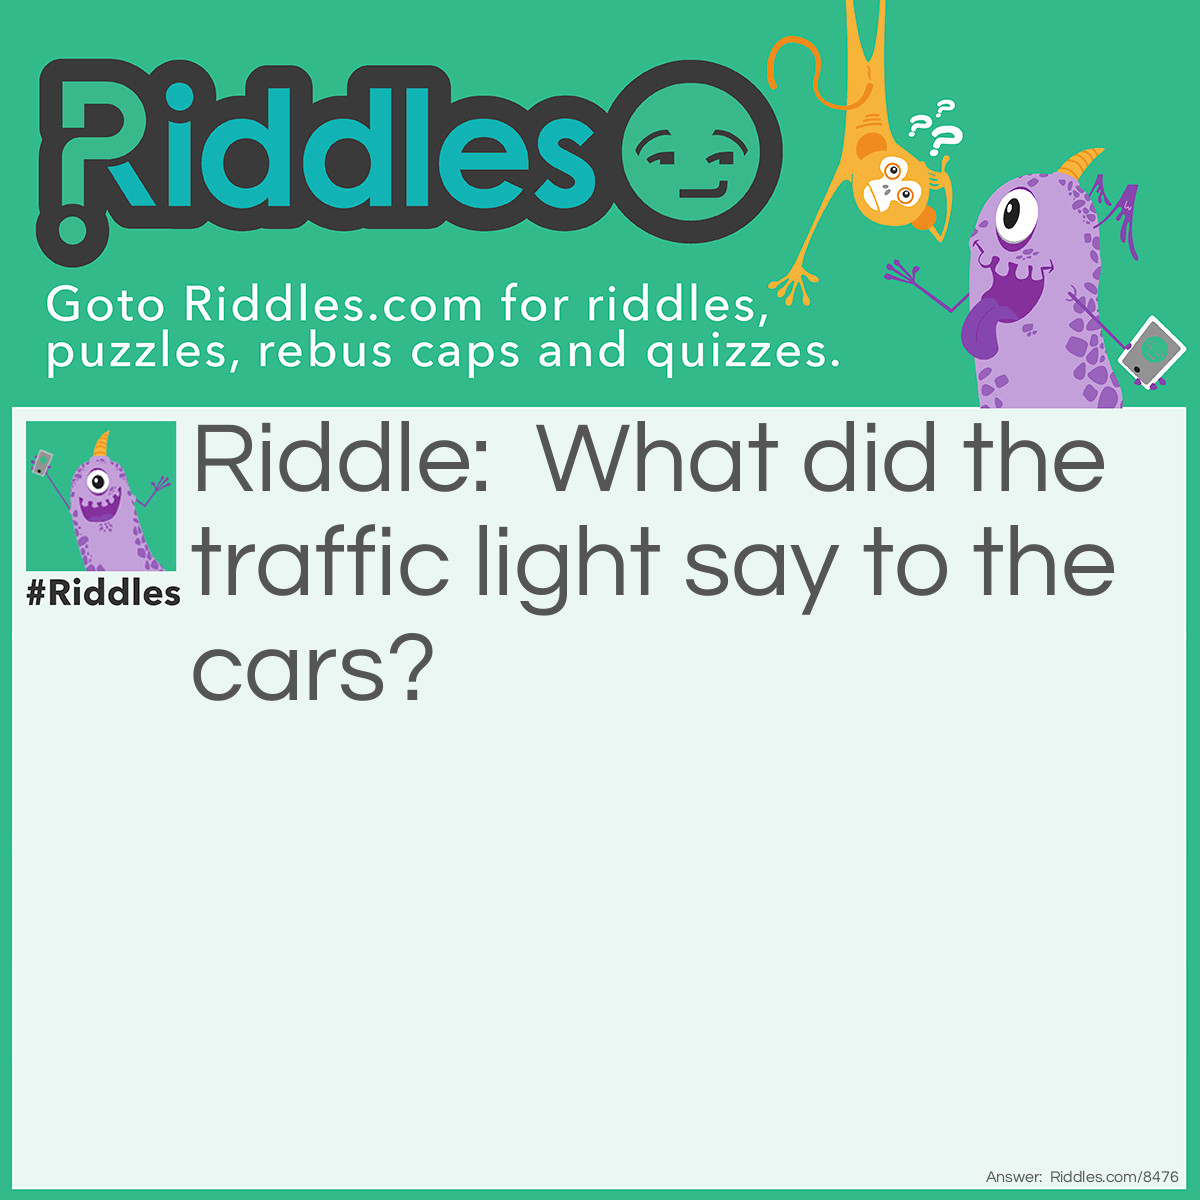 Riddle: What did the traffic light say to the cars? Answer: Don't look, I'm changing!